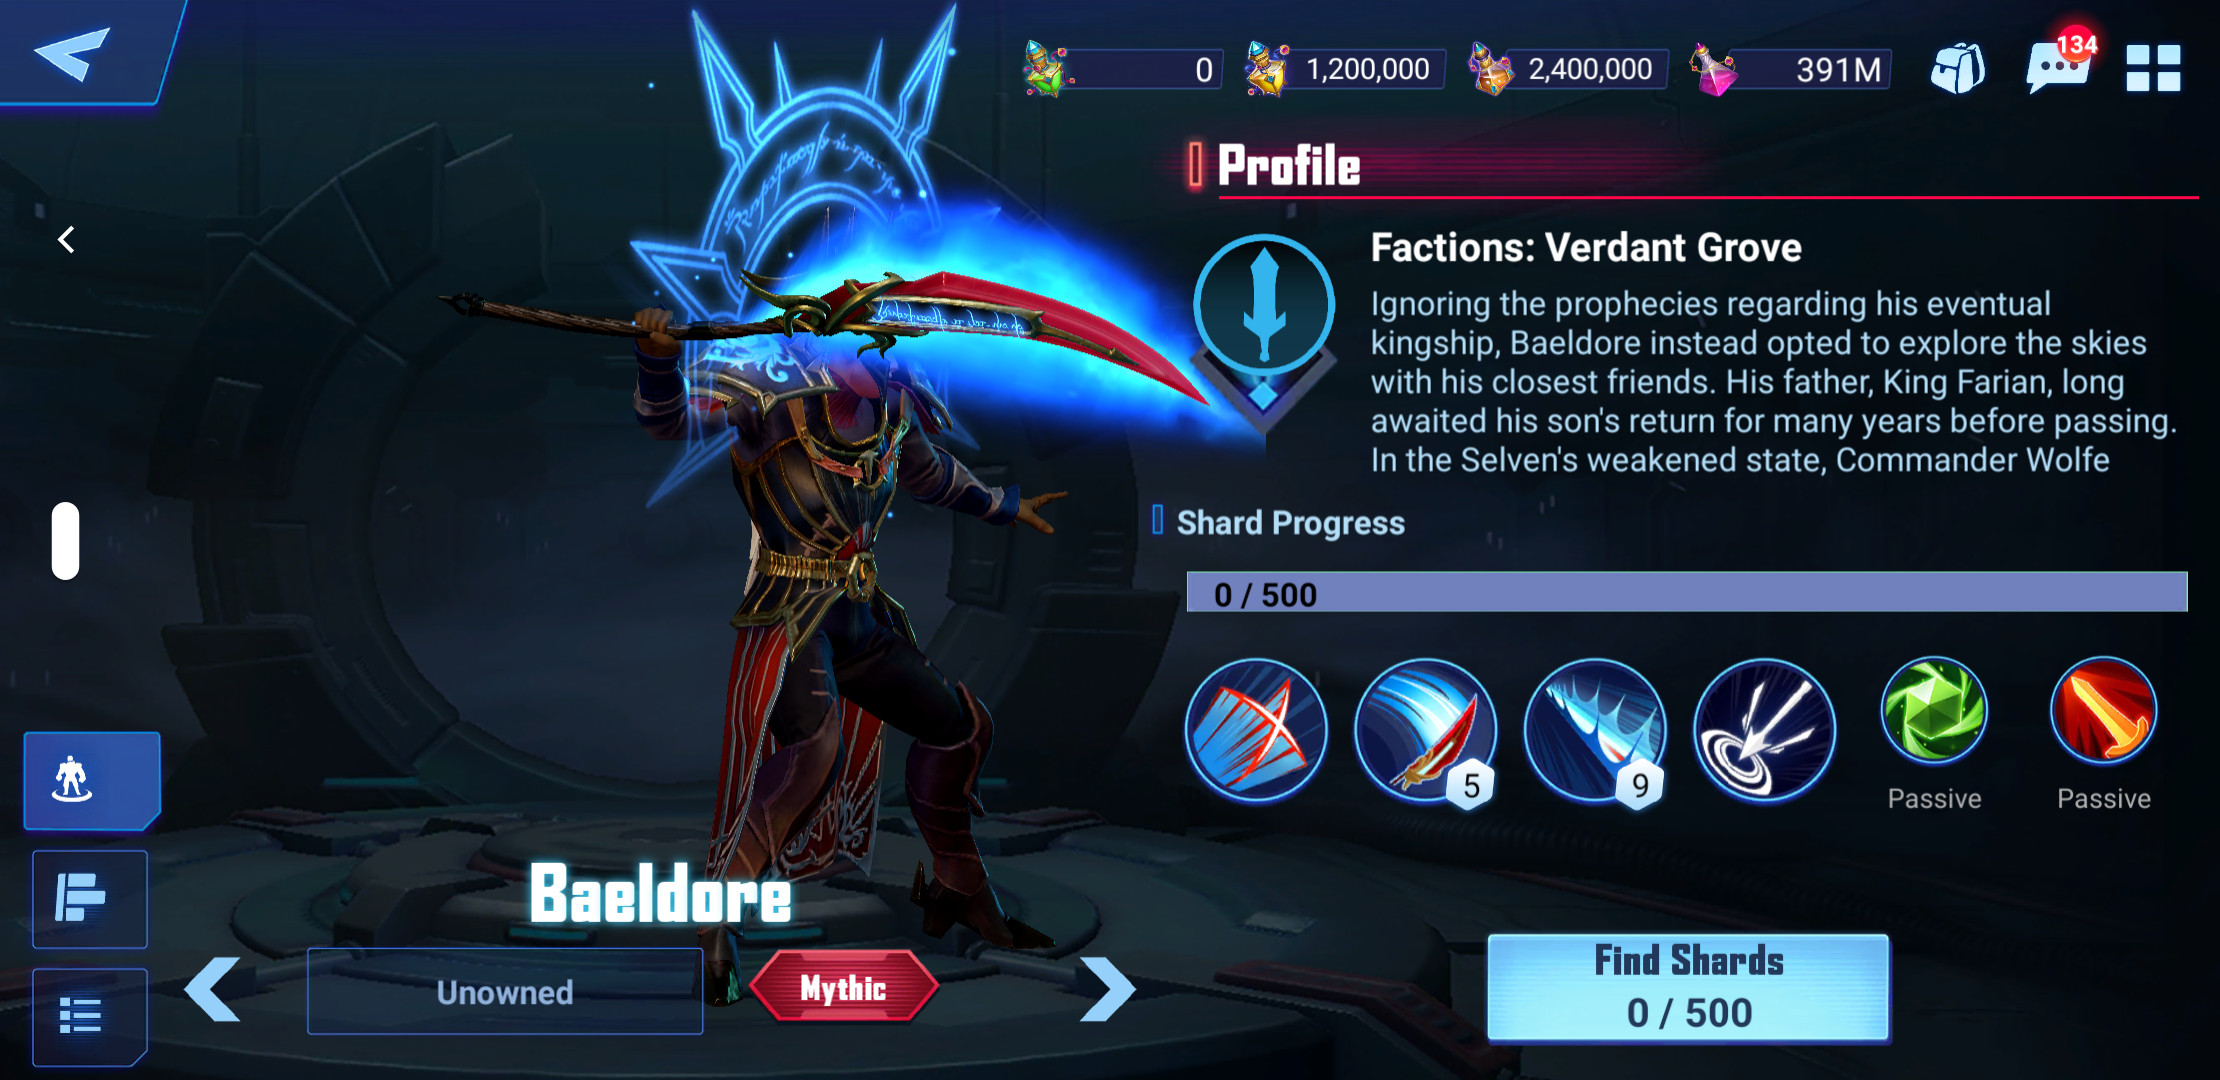 Baeldore's blade in-game character profile shot